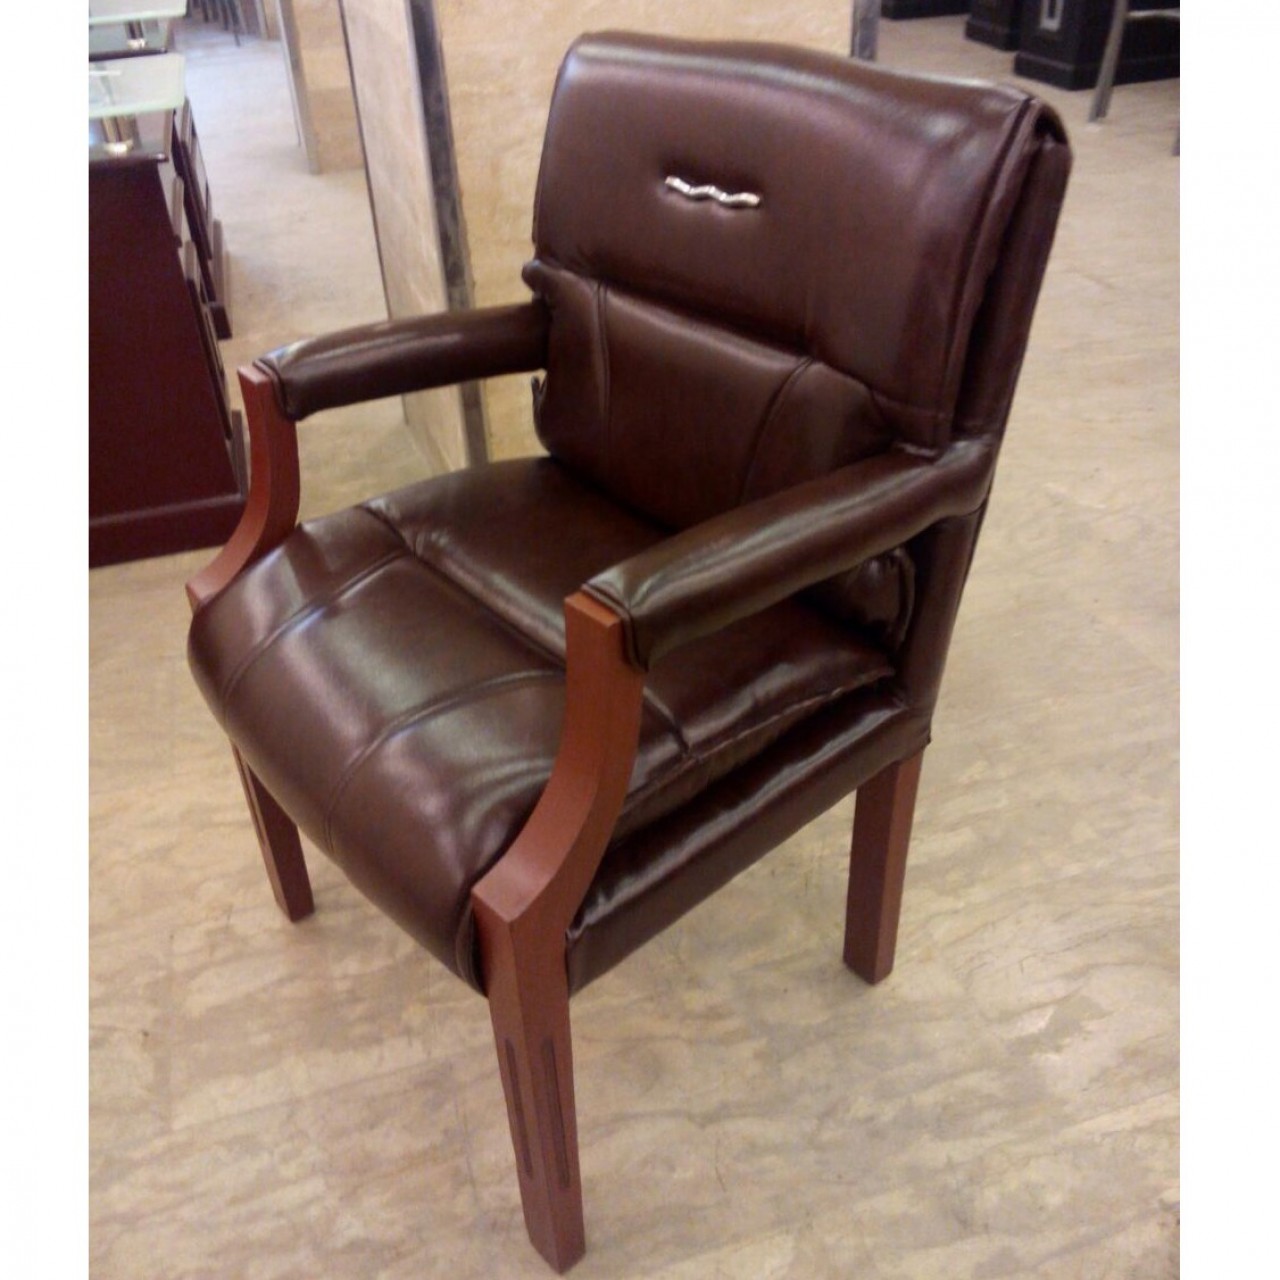 Executive Wooden Chair - Imported Leather & Foam